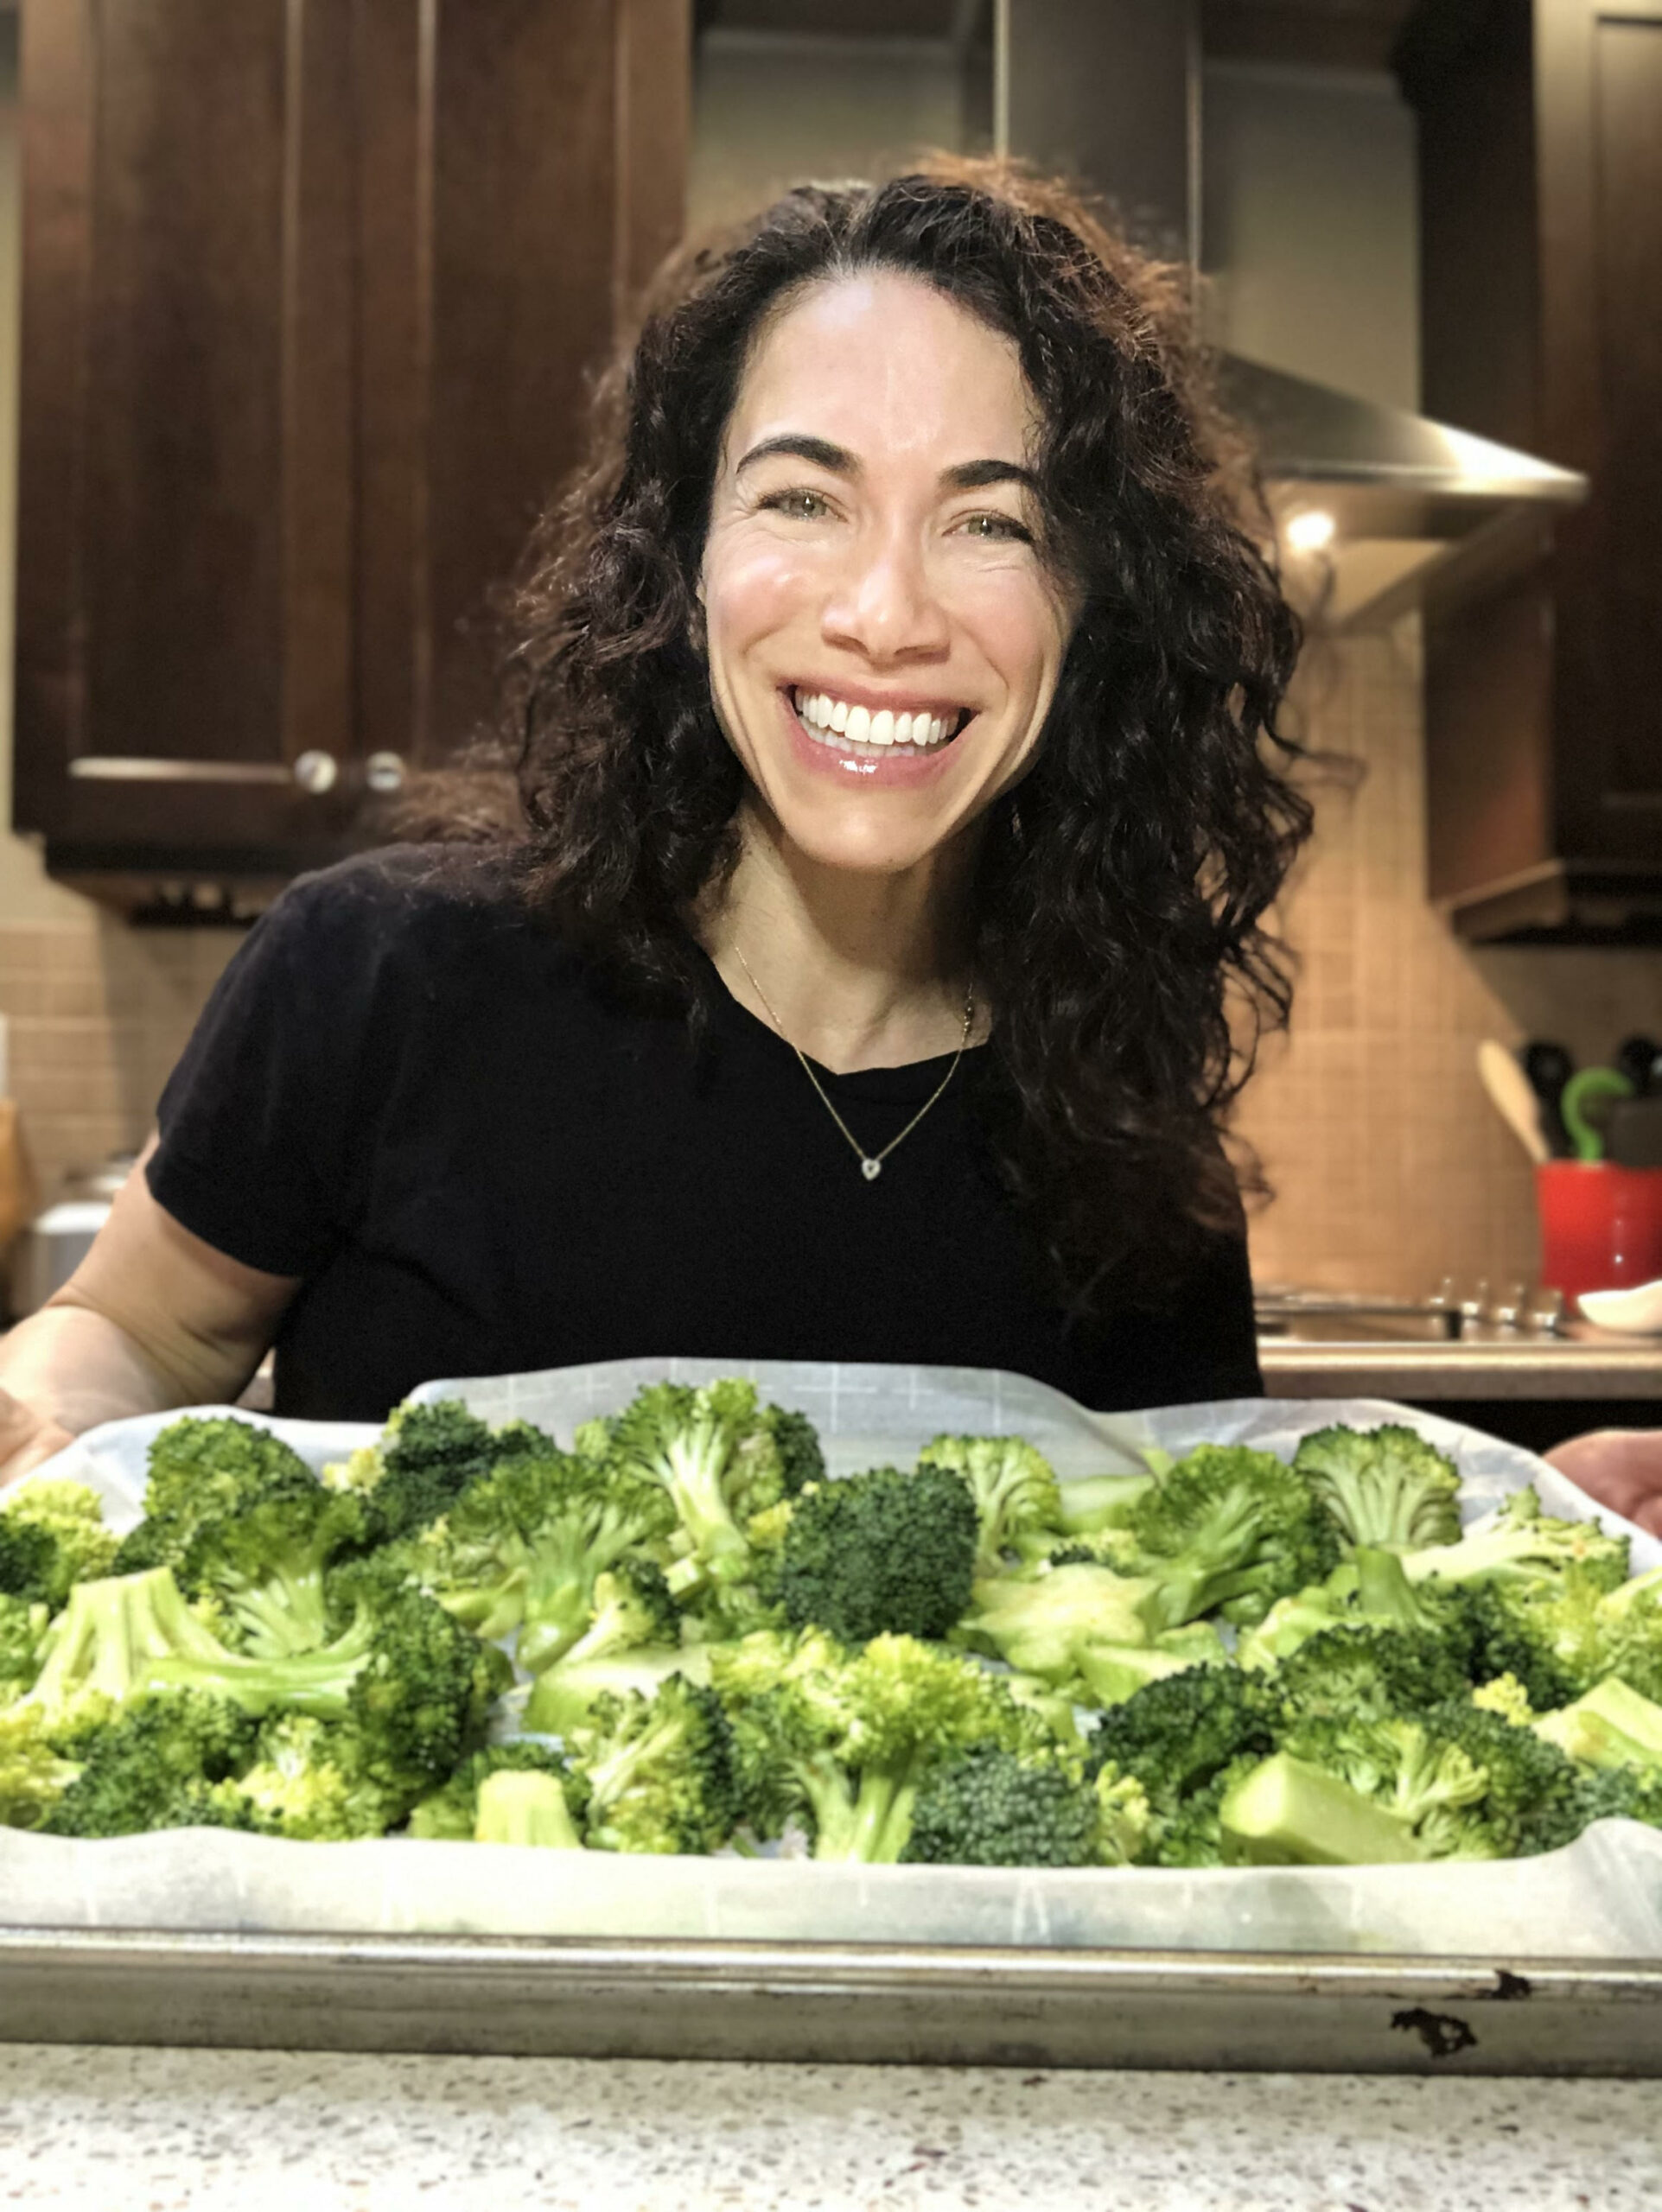 Roasted Broccoli by Marissa Beck, MS, RDN